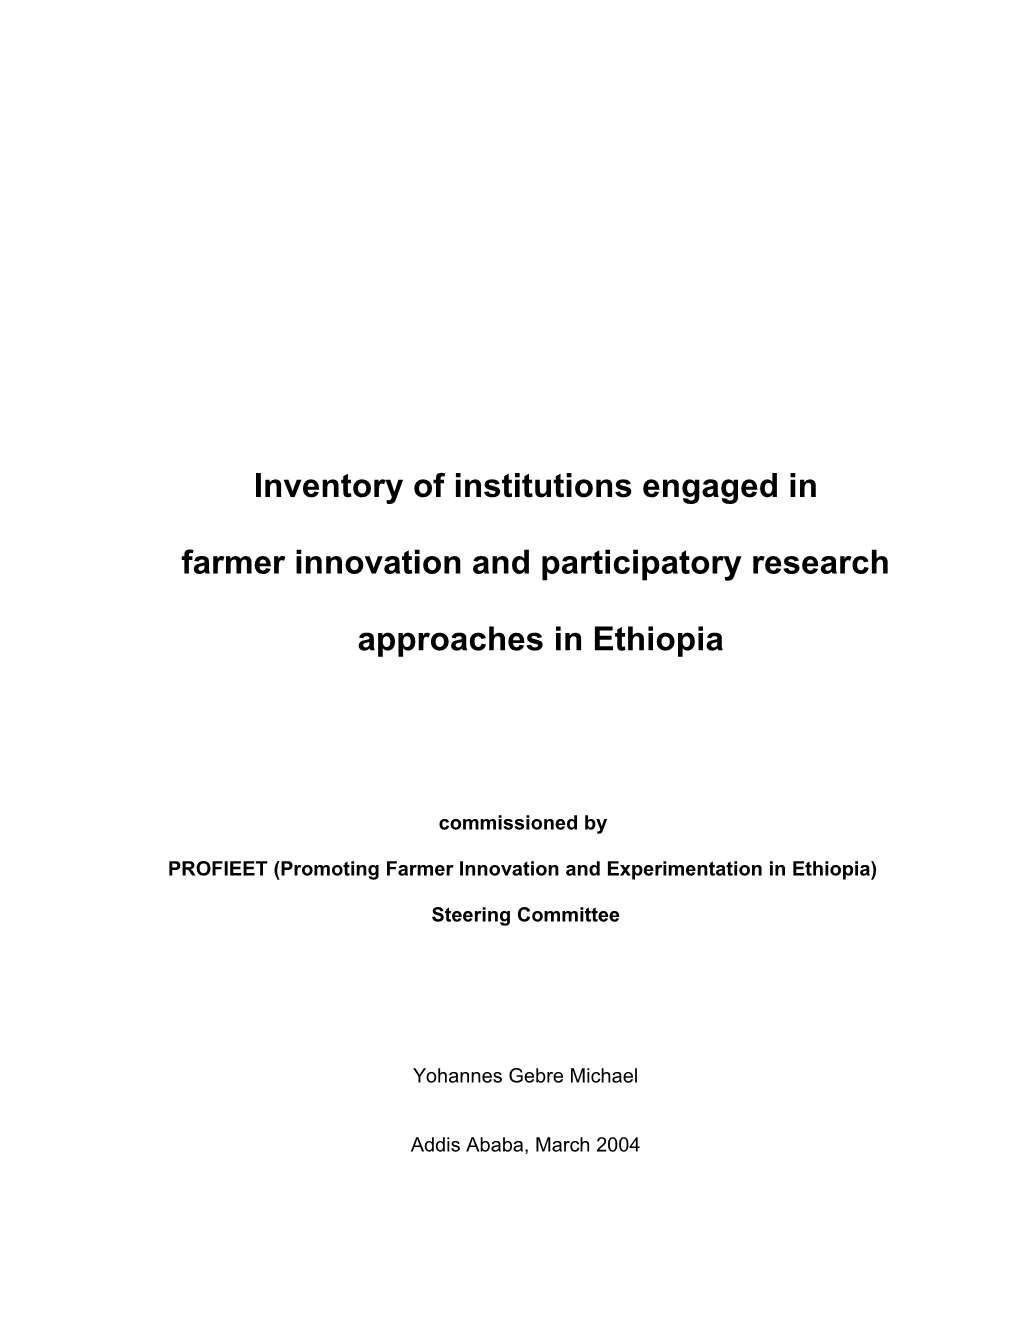 Inventory Of Institutions Engaged On Farmer Innovation And Participatory Research Approaches In Ethiopia